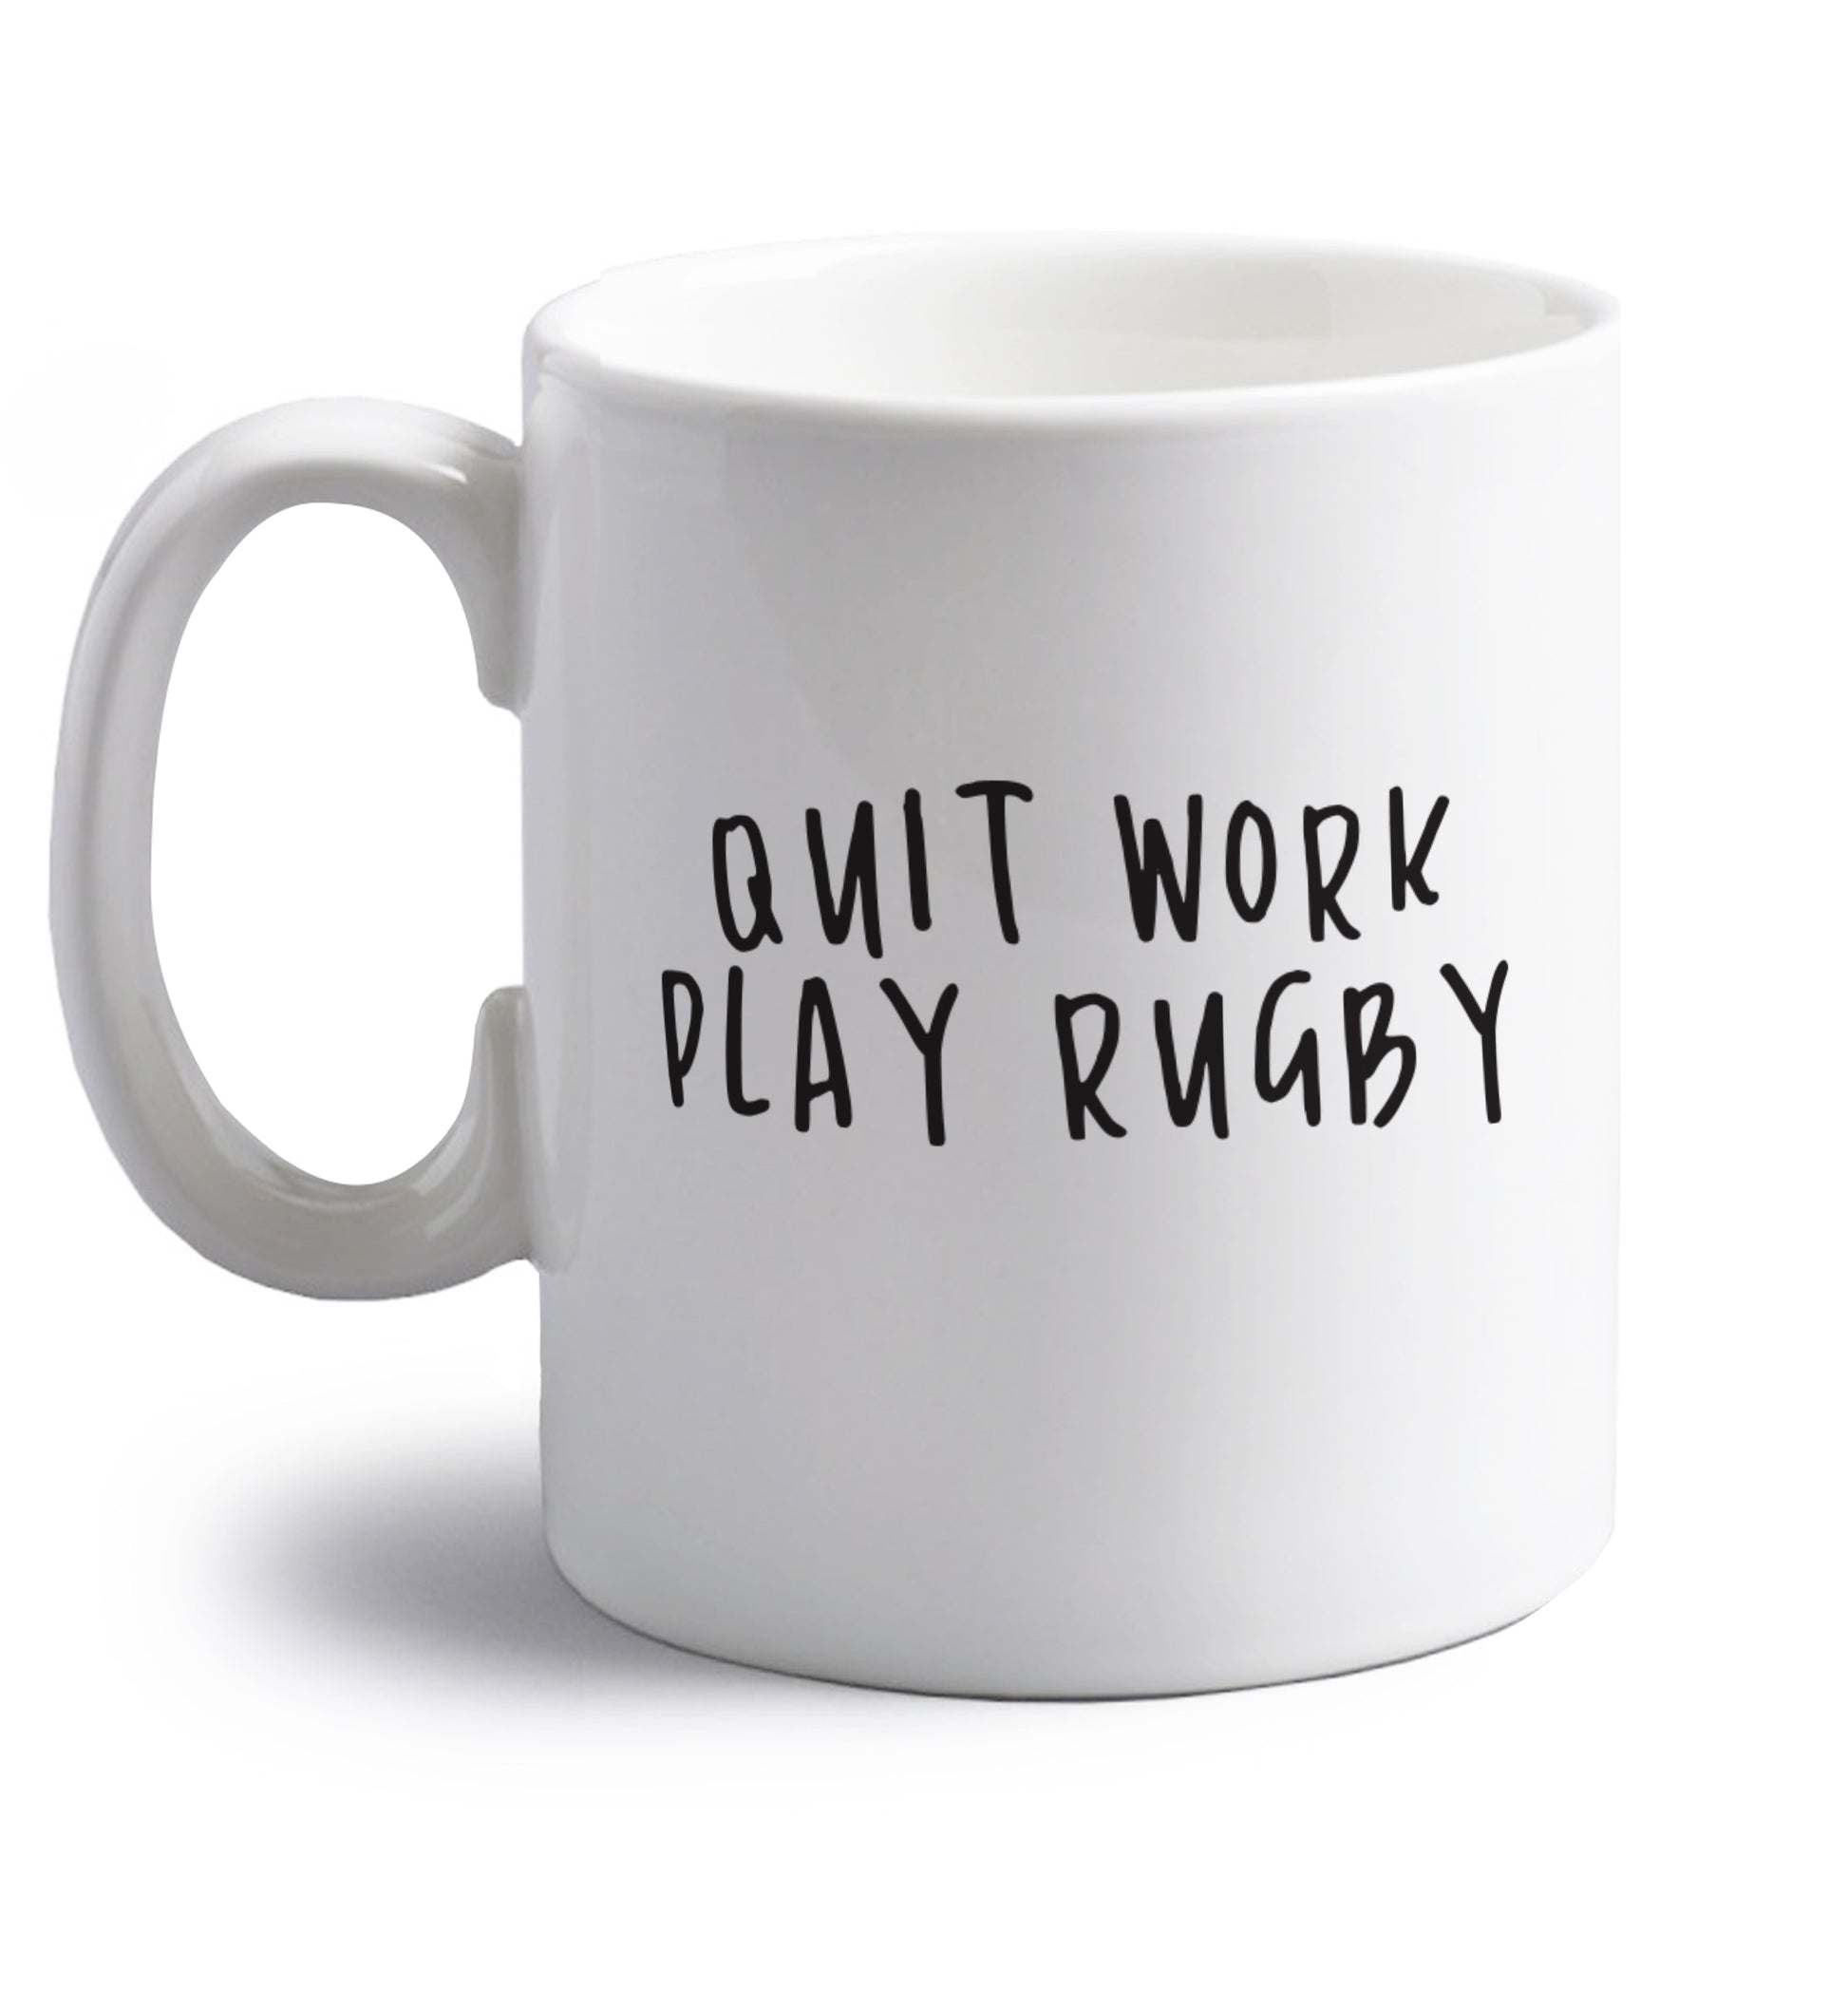 Quit work play rugby right handed white ceramic mug 